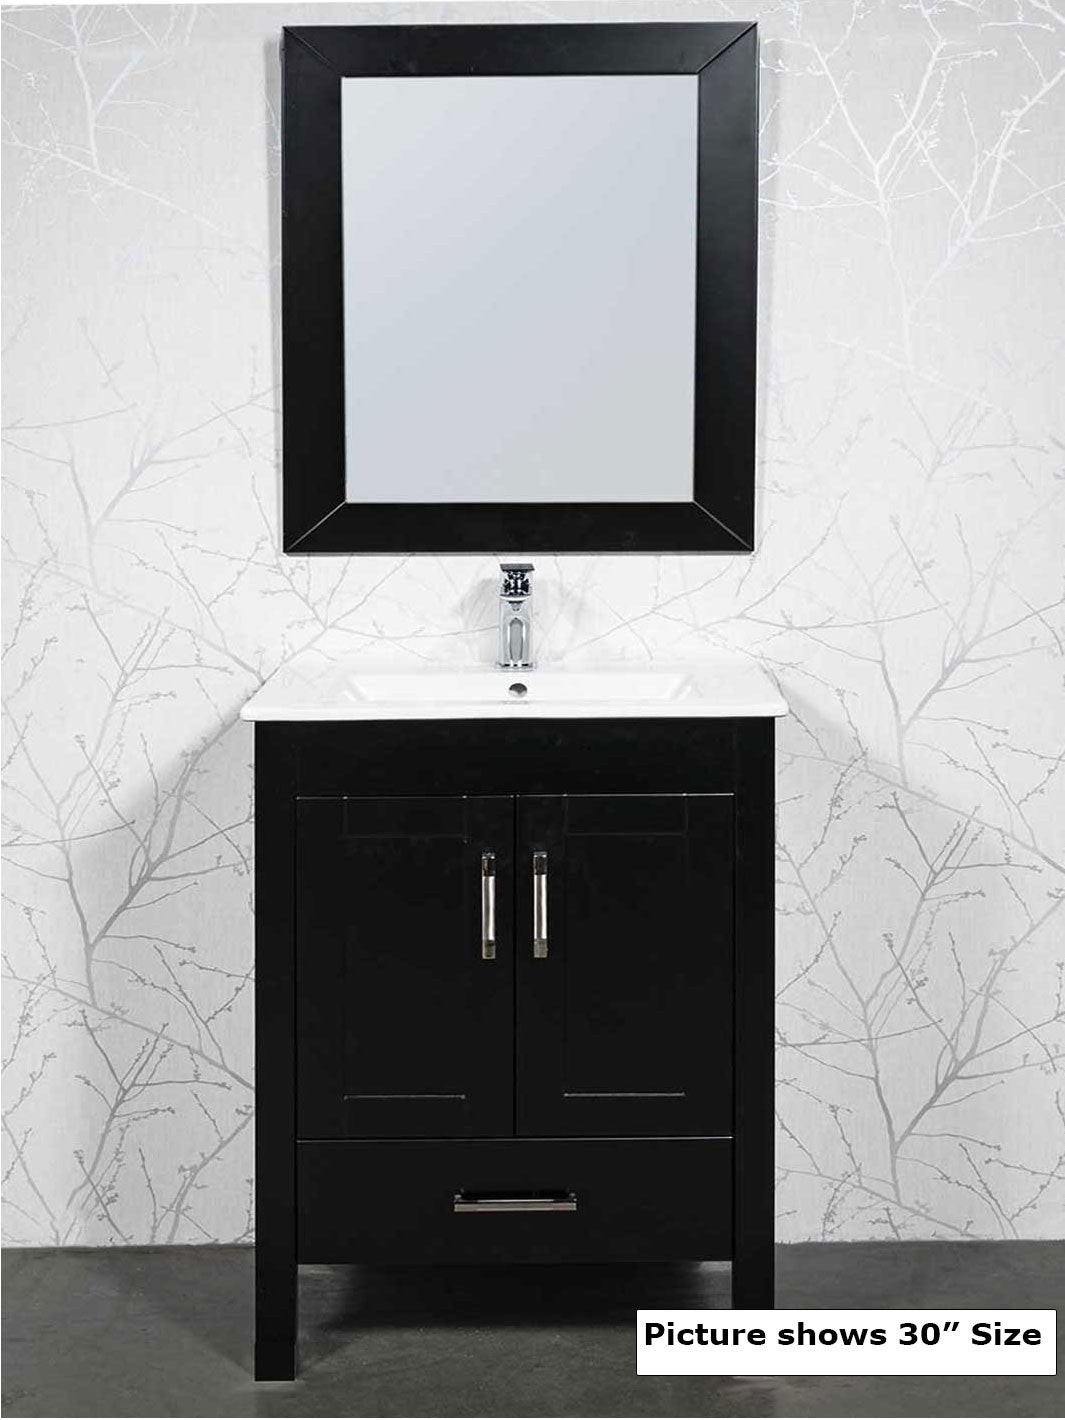 black cabinet with matching mirror, white ceramic sink, chrome pulls and faucet